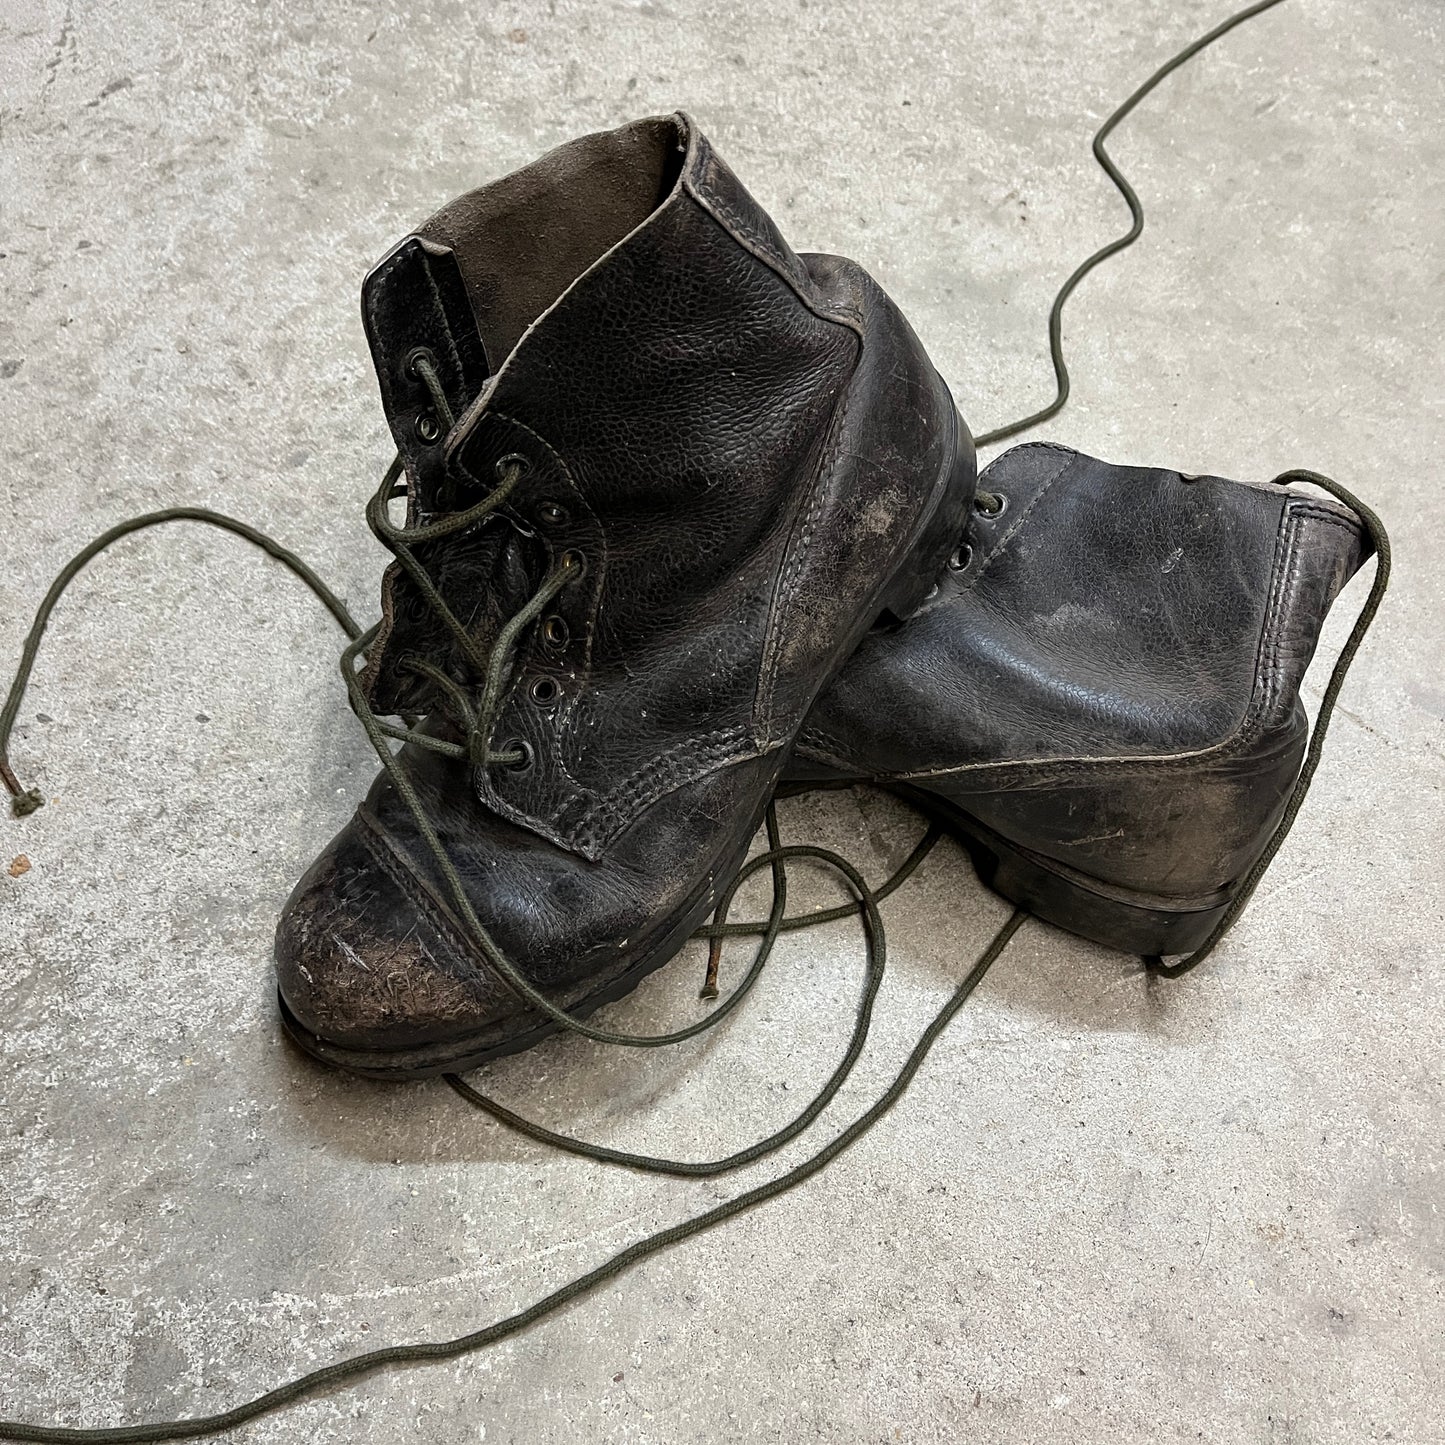 1980s 1990s British Army Boots